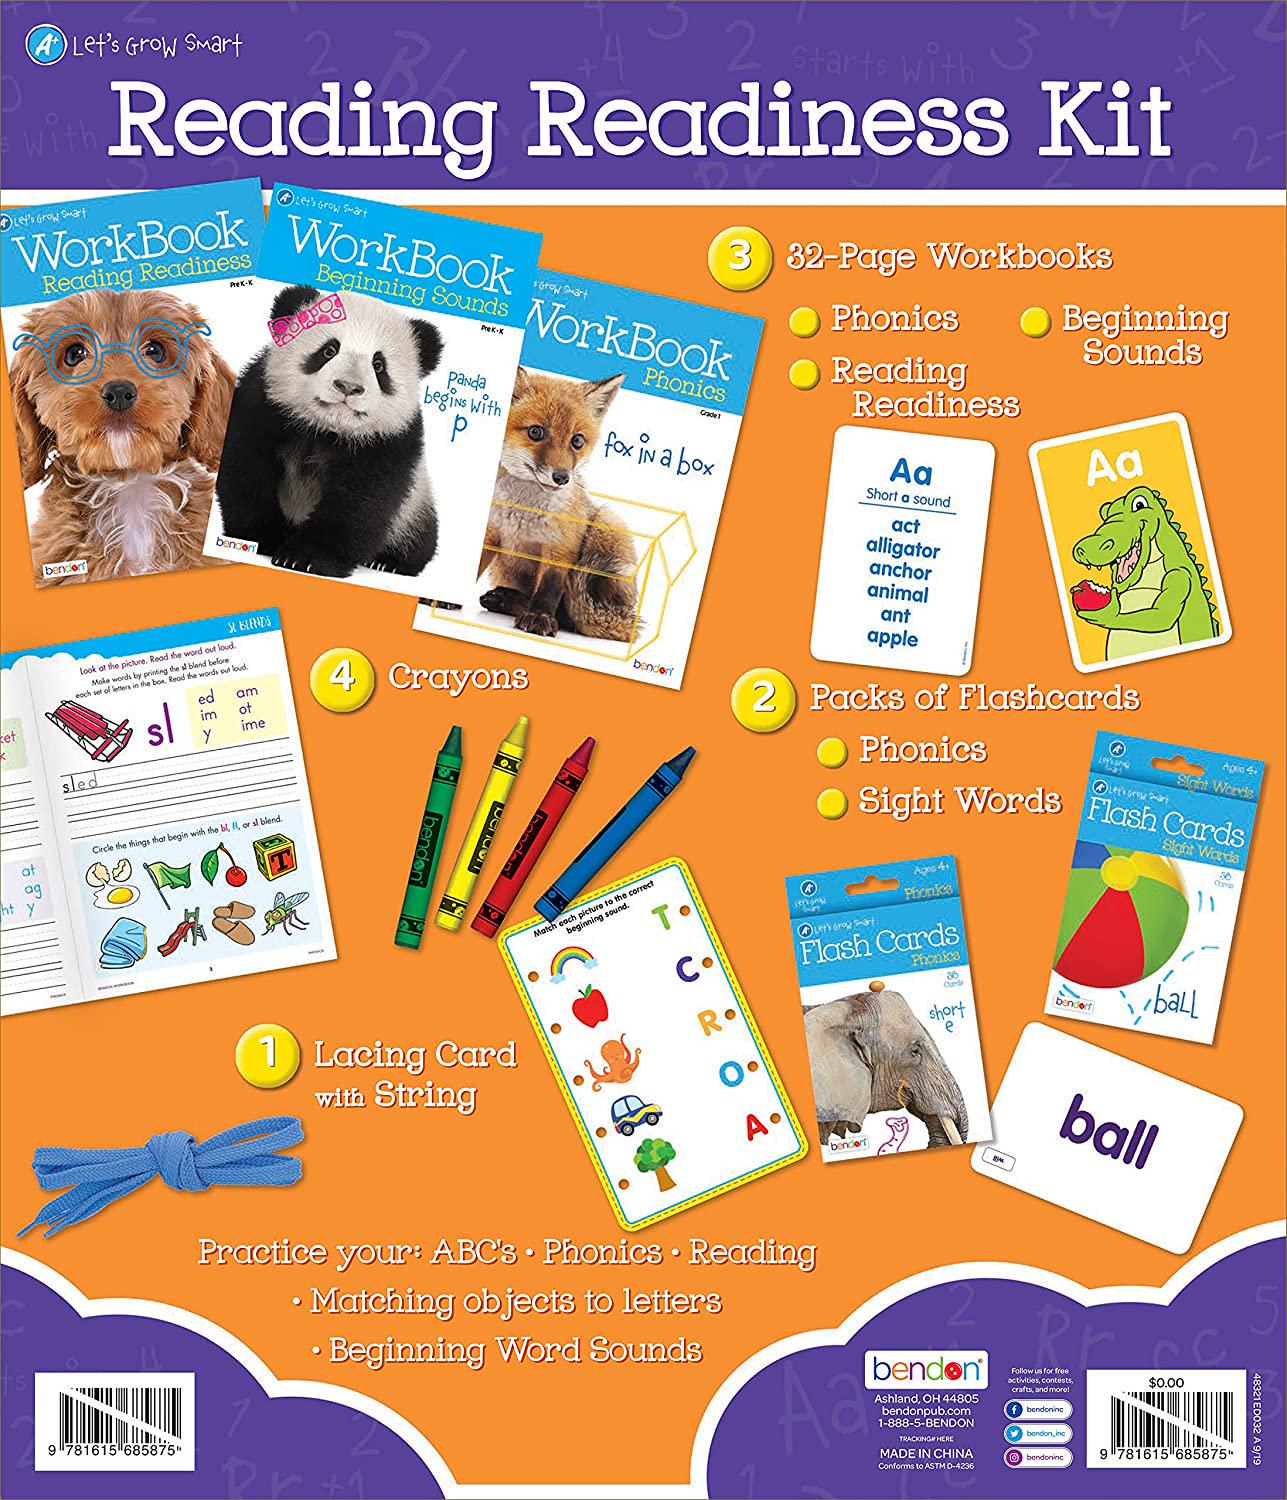 Bendon, Learn to Read, Reading Readiness Educational Box Set with 3 Early Learning Workbooks, Flash Cards, Crayons and More